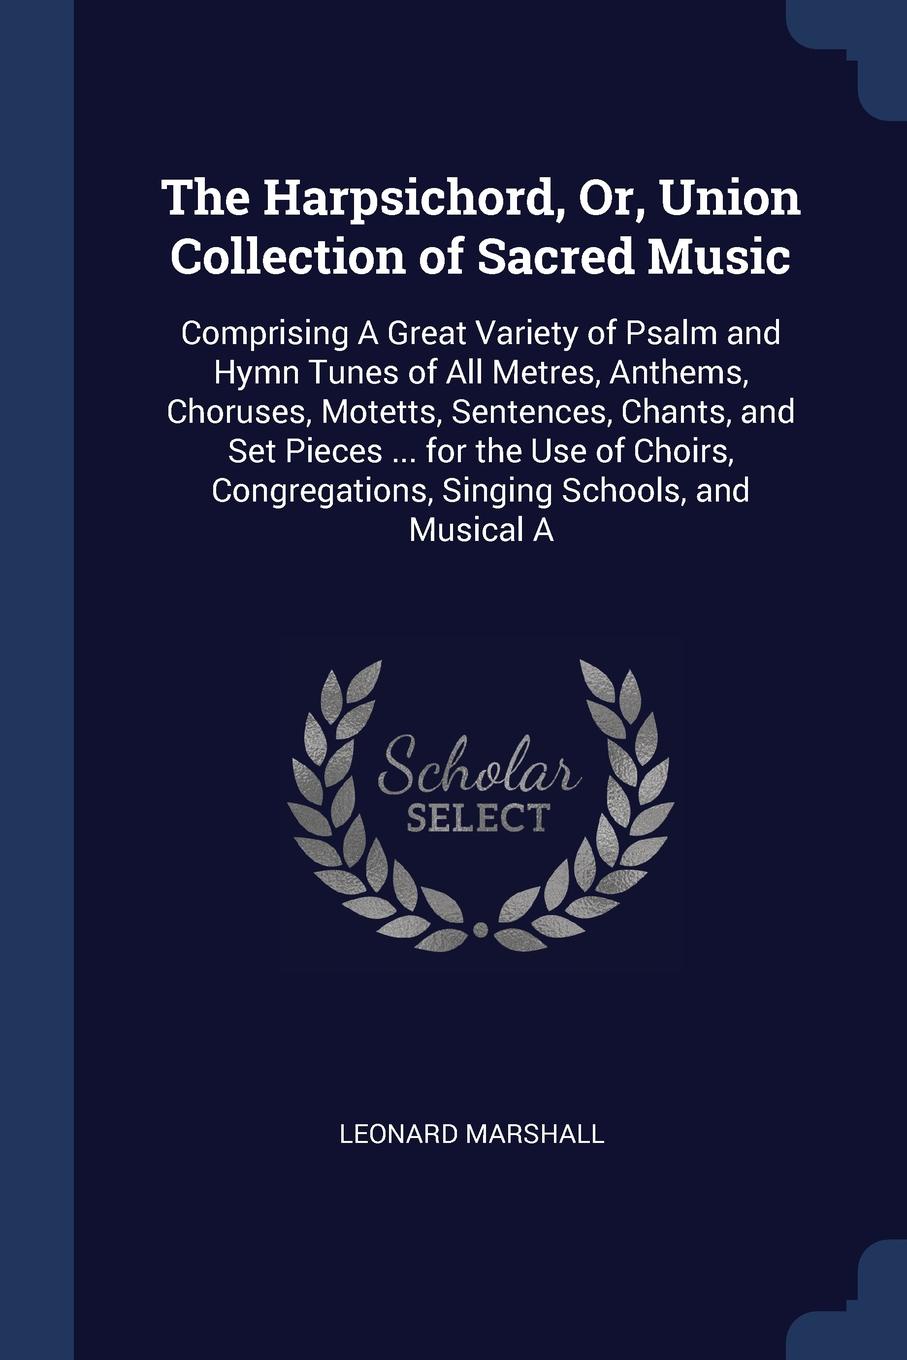 The Harpsichord, Or, Union Collection of Sacred Music. Comprising A Great Variety of Psalm and Hymn Tunes of All Metres, Anthems, Choruses, Motetts, Sentences, Chants, and Set Pieces ... for the Use of Choirs, Congregations, Singing Schools, and M...